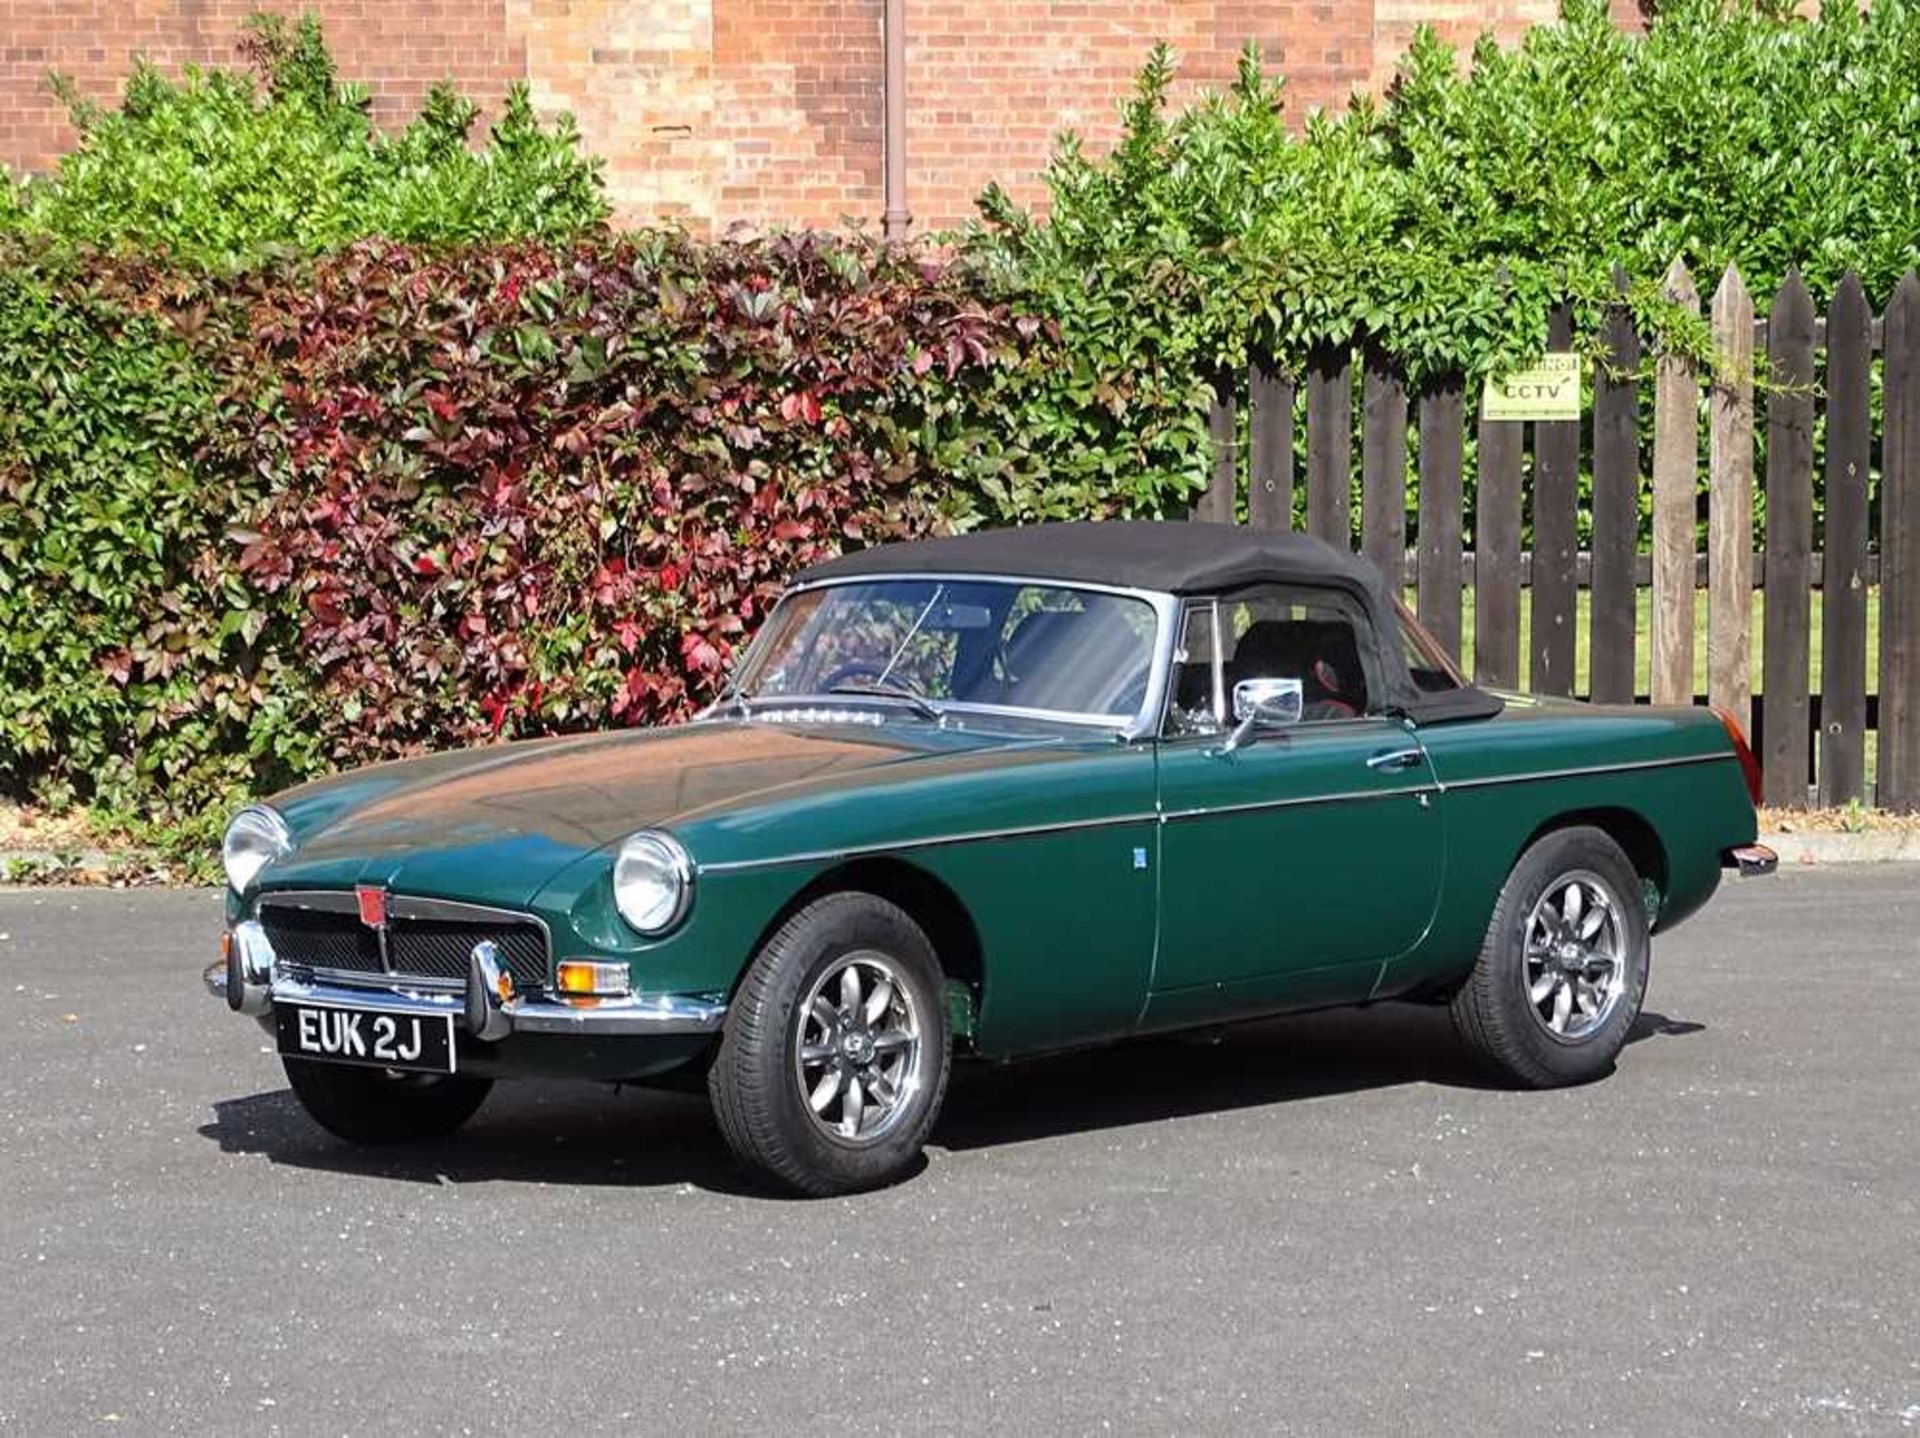 1971 MG B Roadster Restored at a cost of c.£33,000 - Image 18 of 43